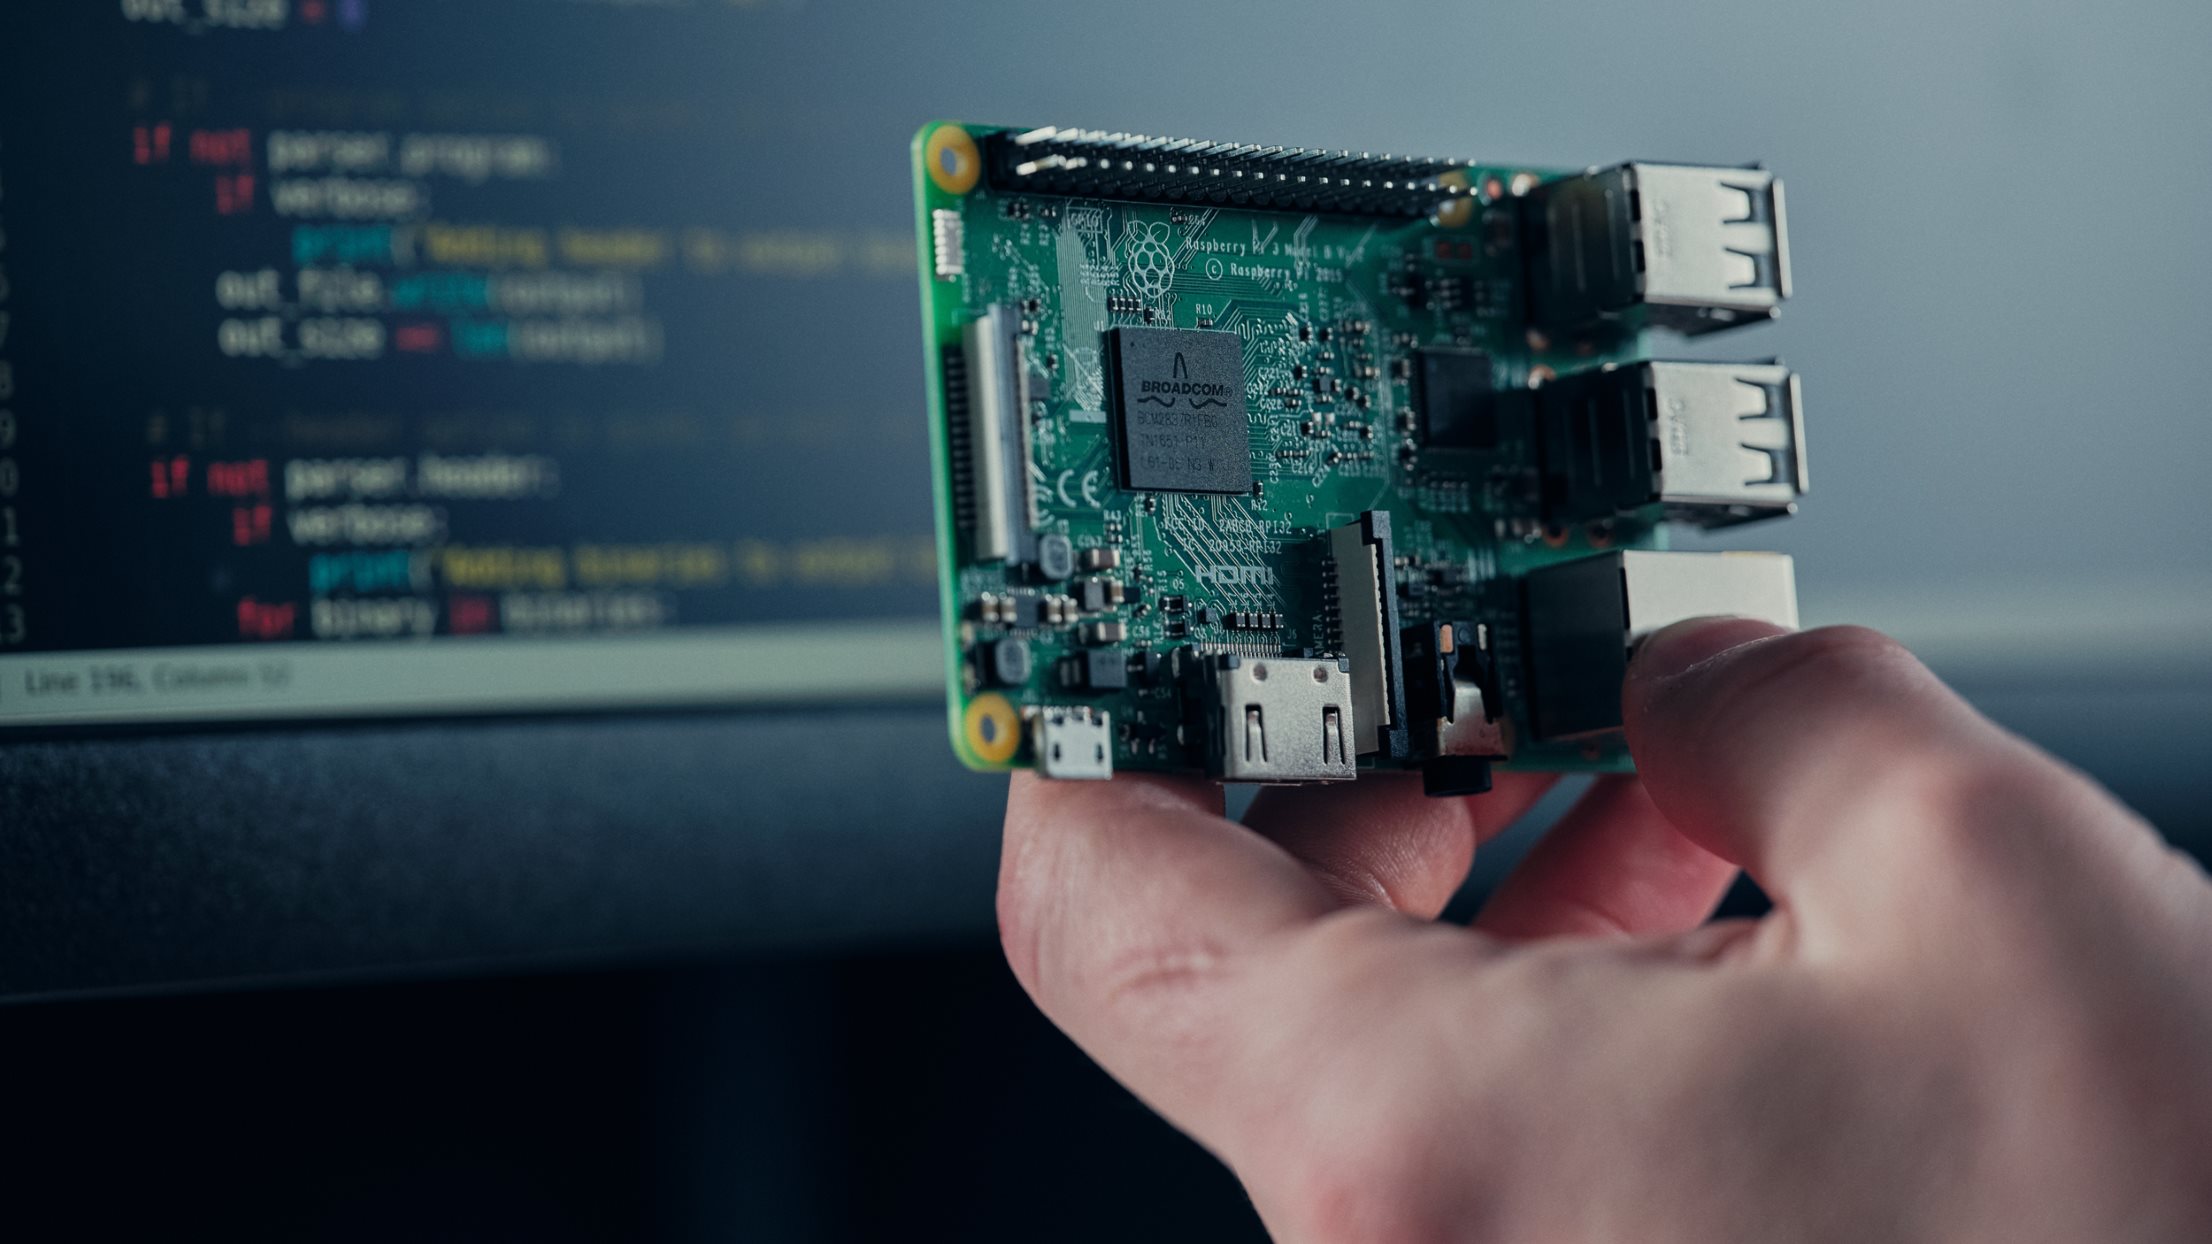 A Solar Manager device, which is based on the Raspberry Pi